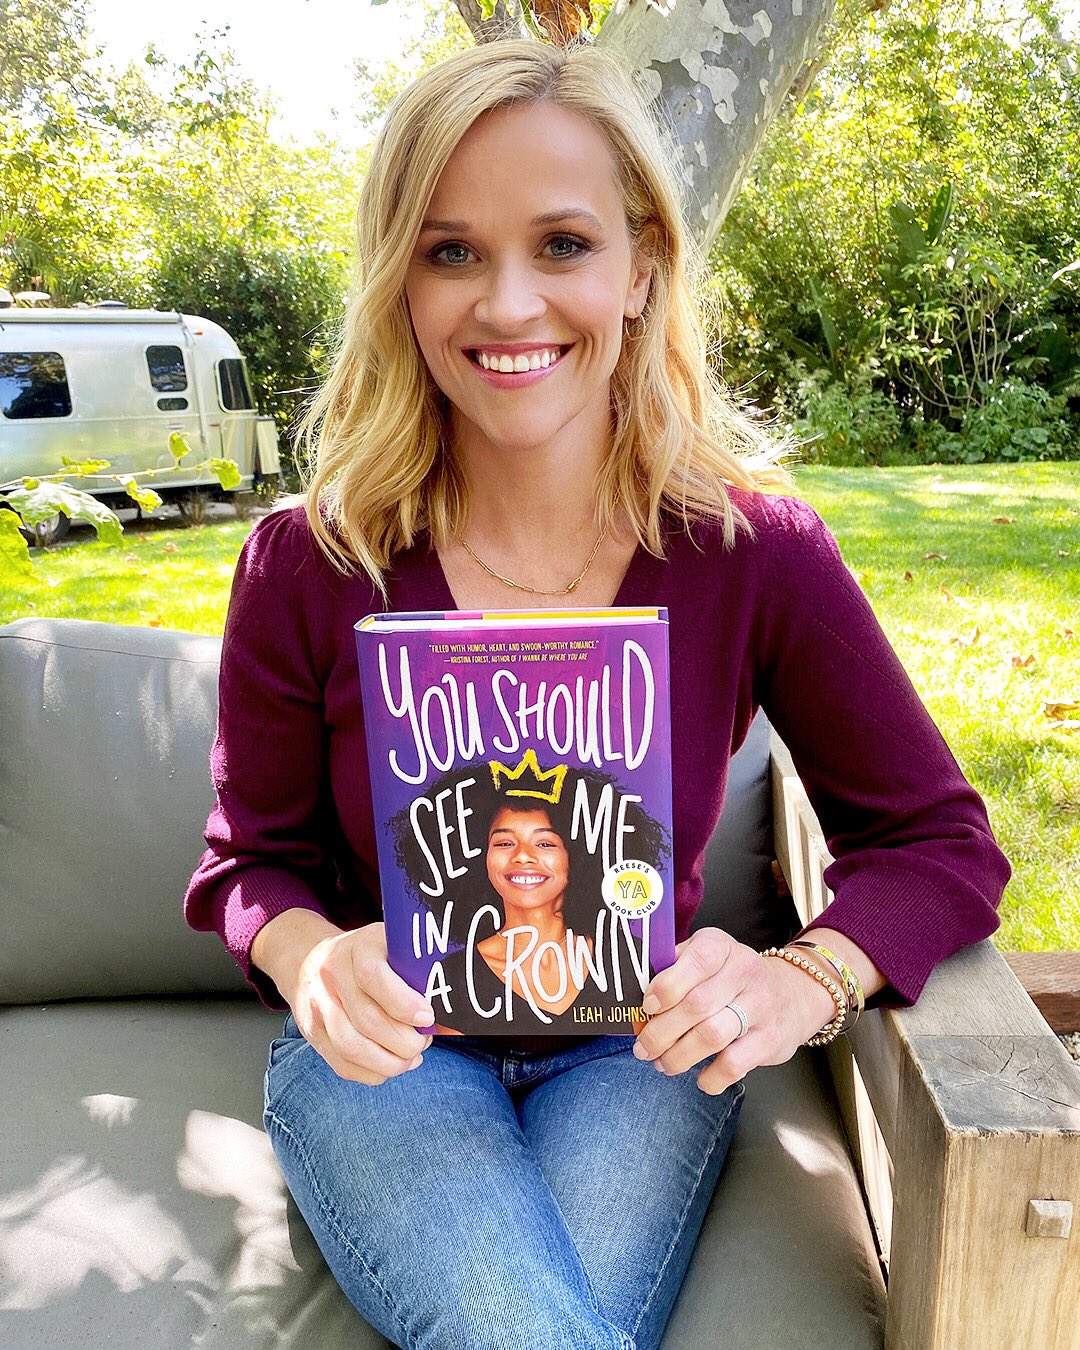 Reese Witherspoon I M So Thrilled To Introduce My Very First Young Adult Book Pick For Reesesbookclub You Should See Me In A Crown By Leahjohnson Join Is This Month